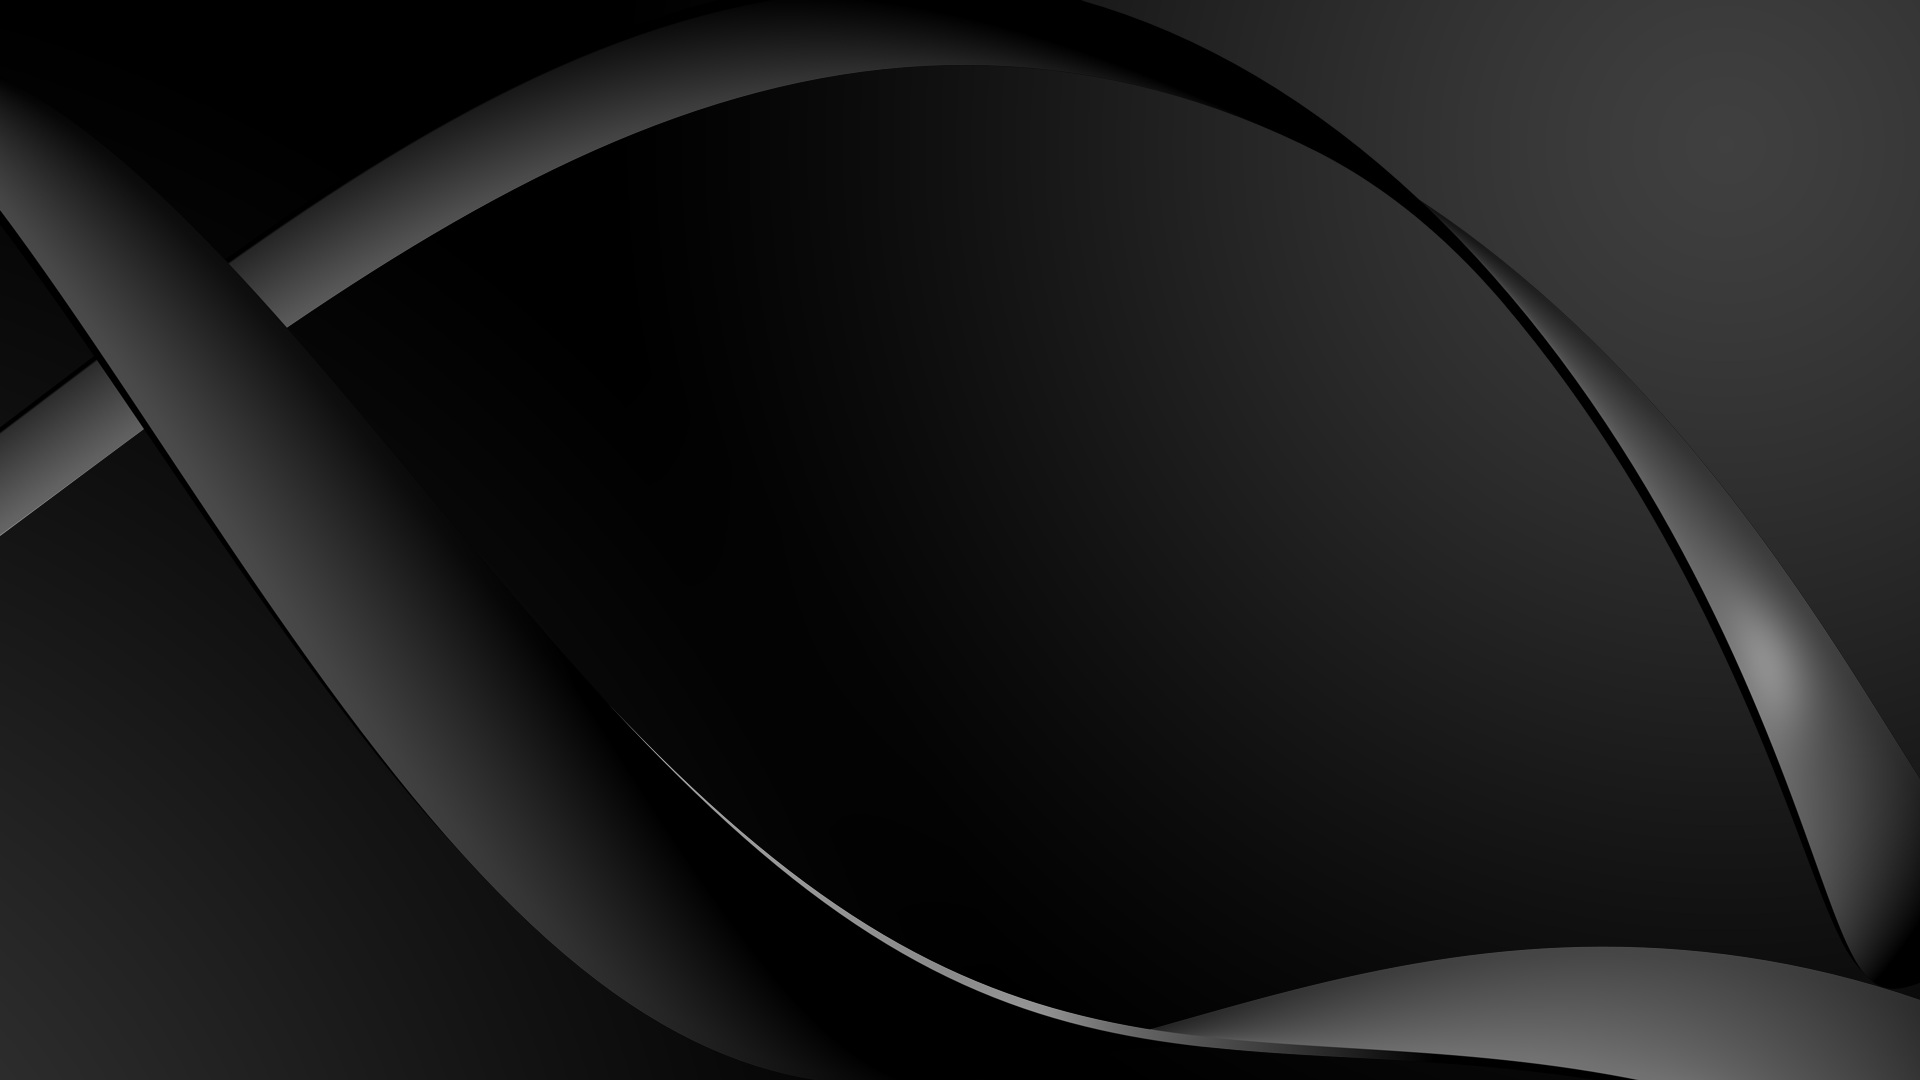 Black Abstract Wallpaper 2835 Hd Wallpapers in Abstract   Imagescicom